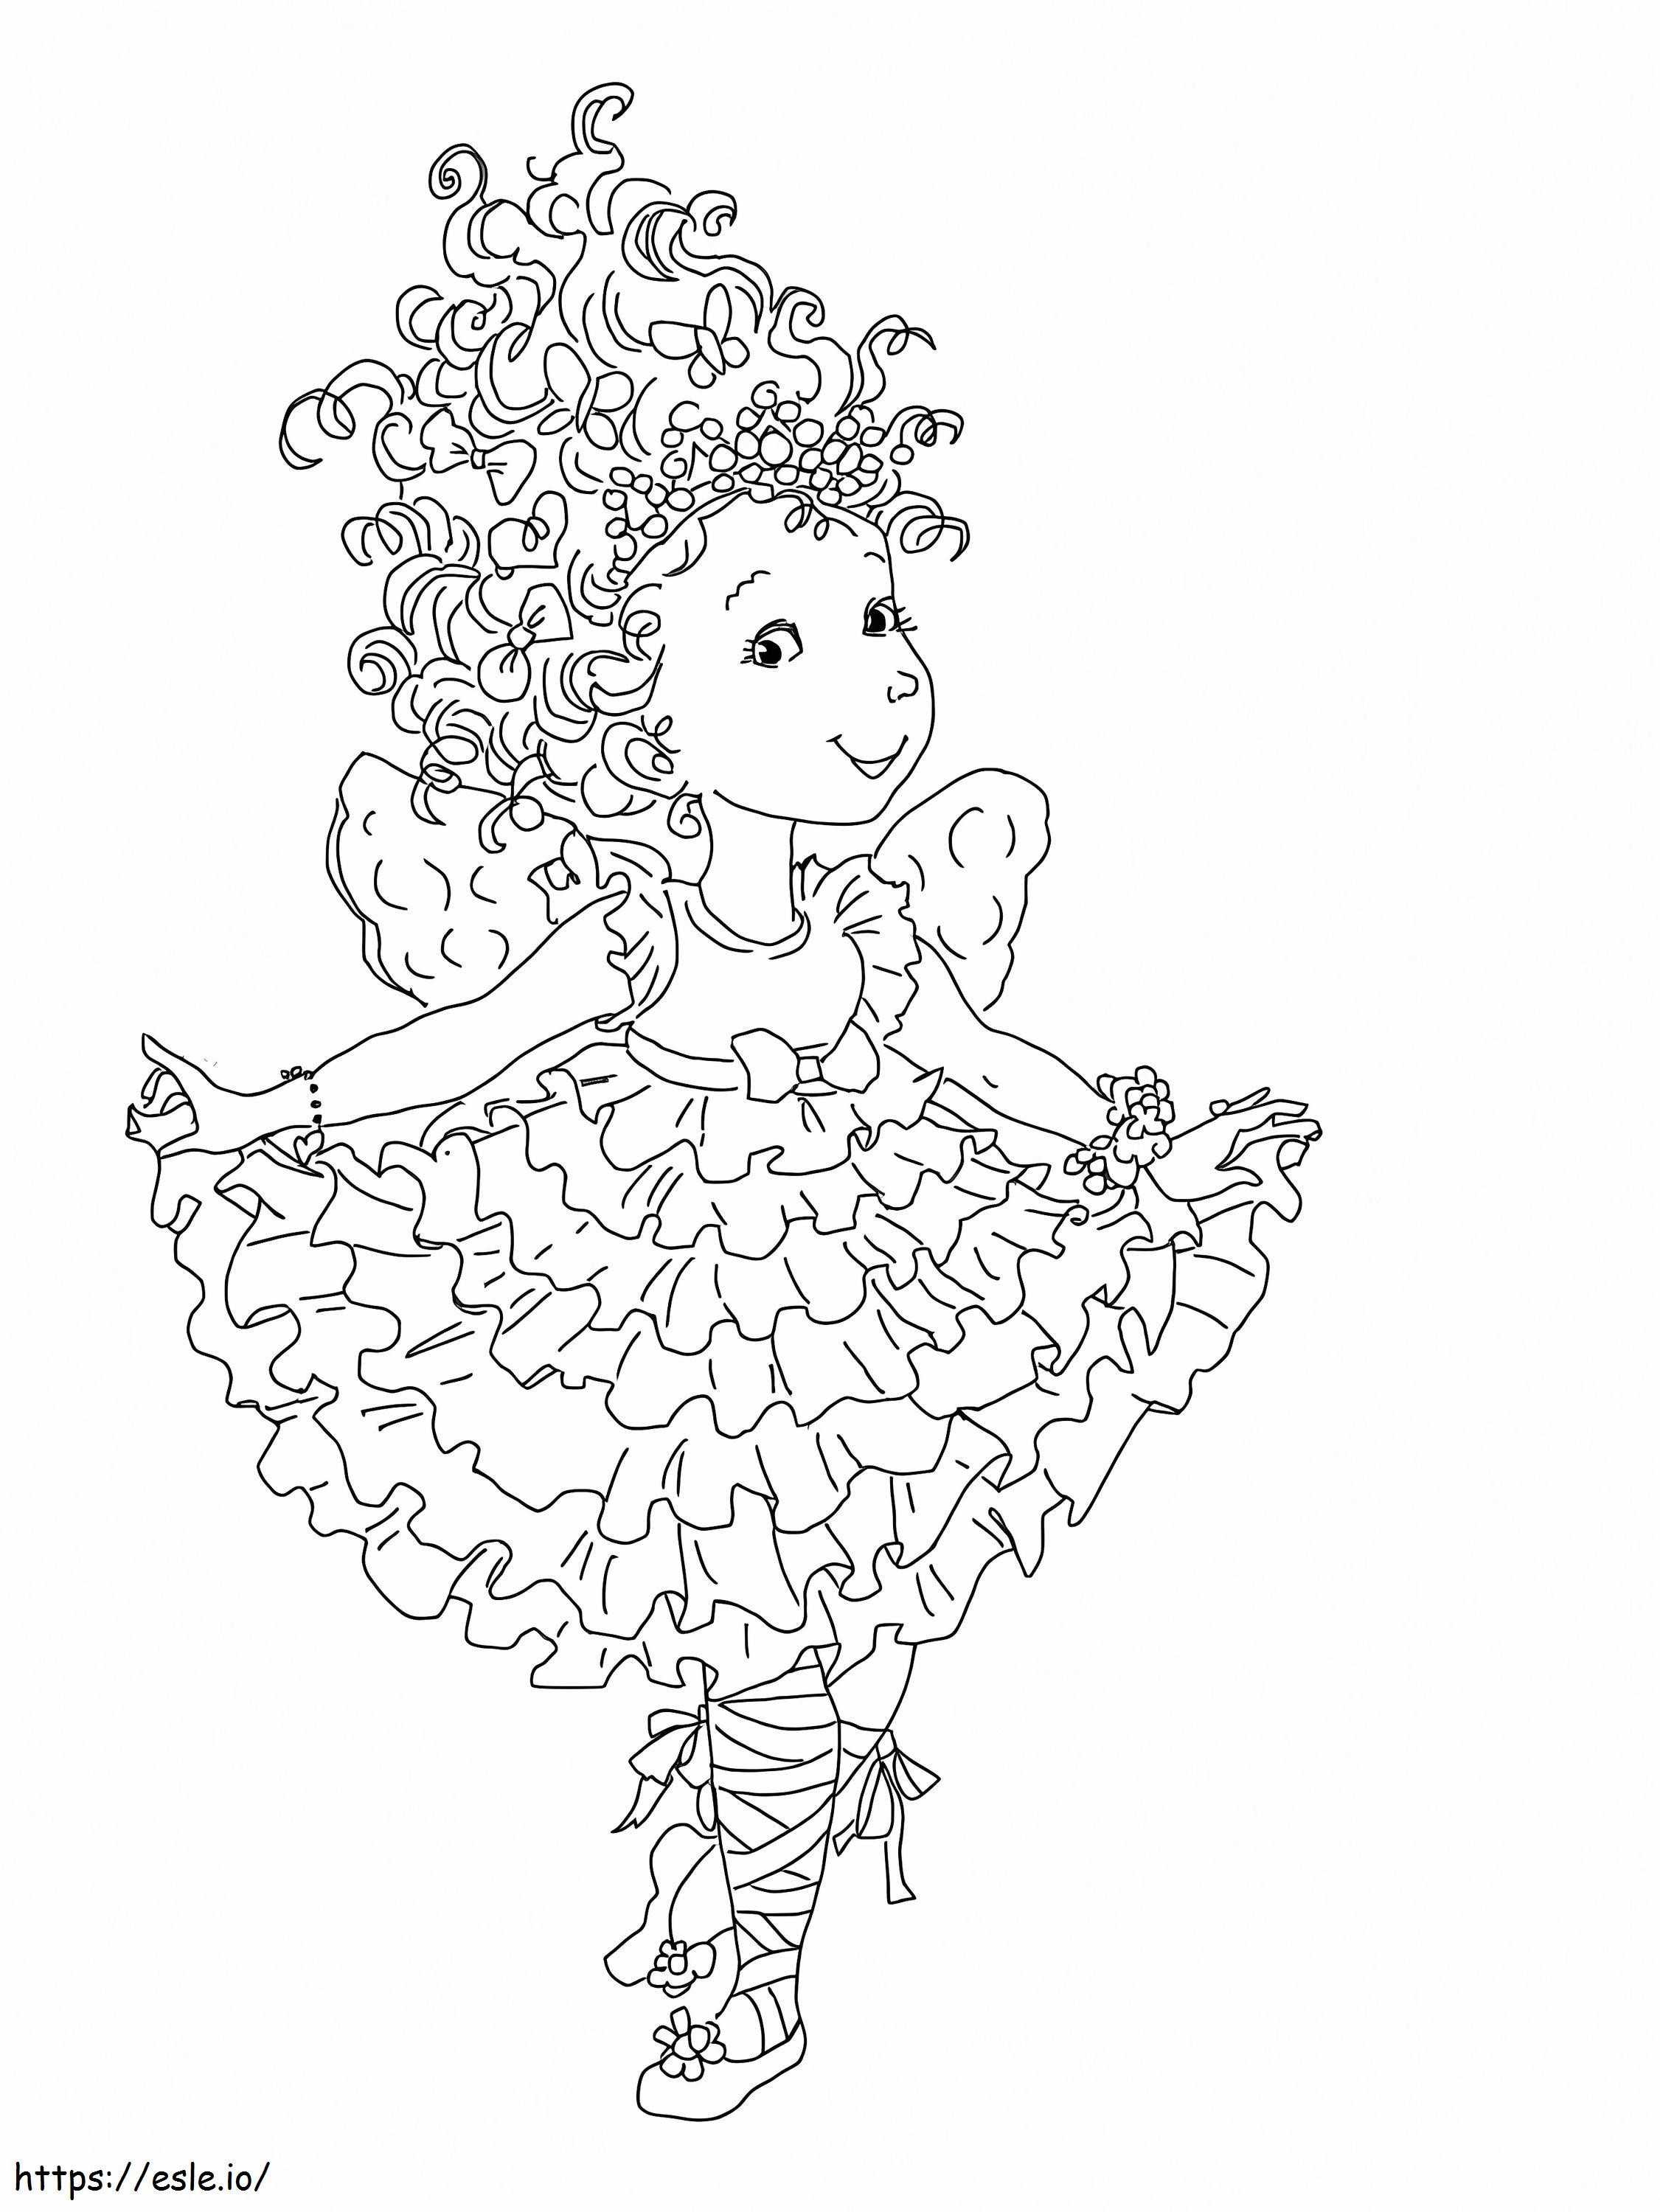 Curtseying Fancy Nancy coloring page